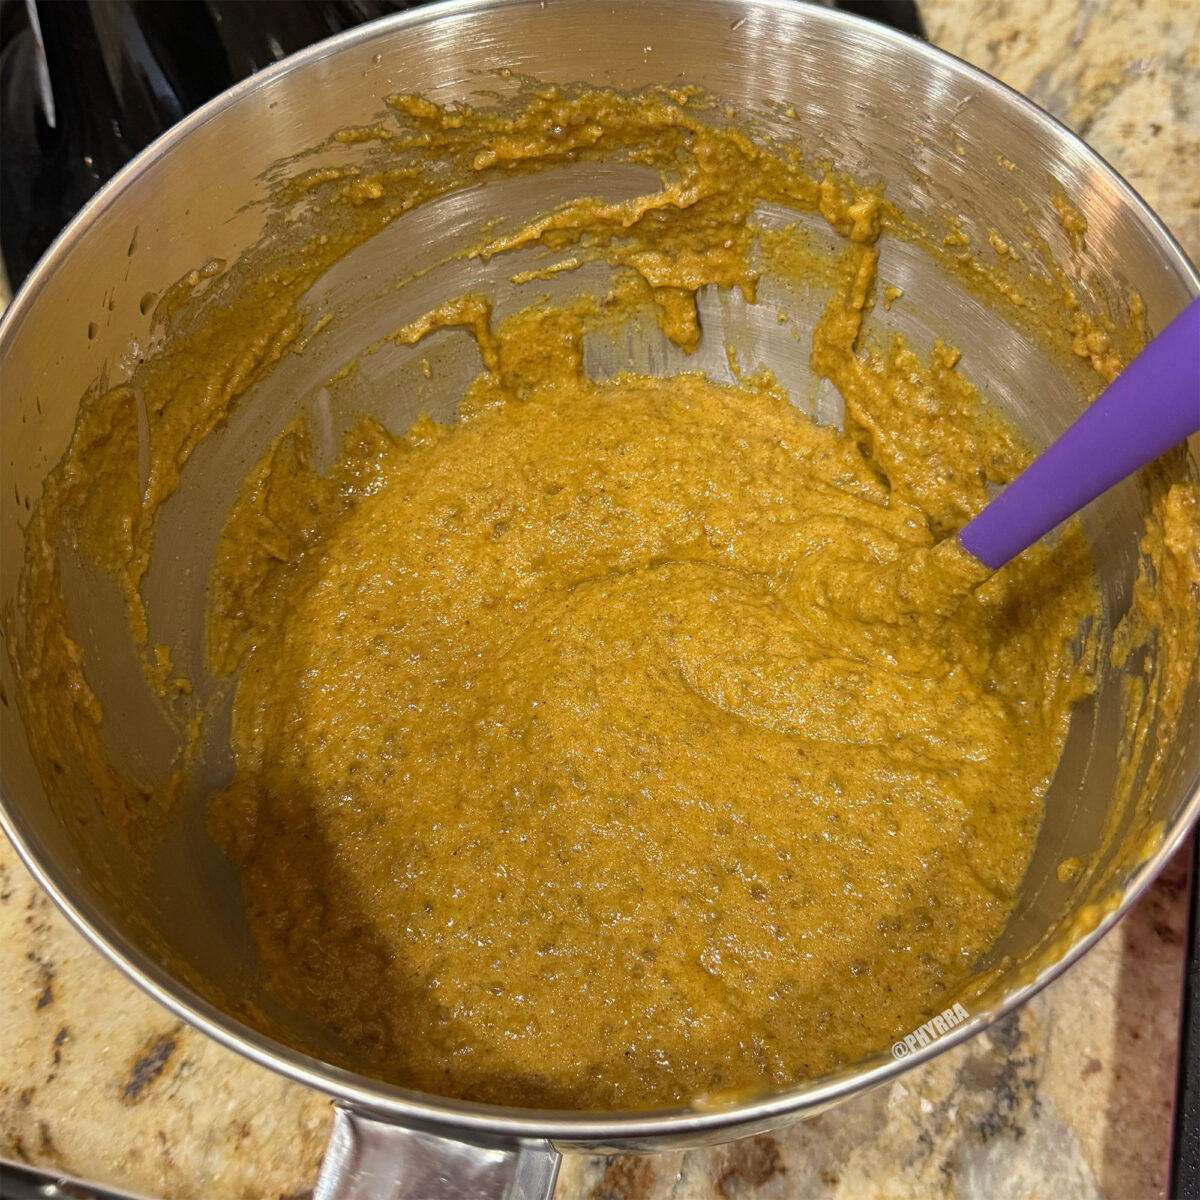 A picture of the pumpkin batter